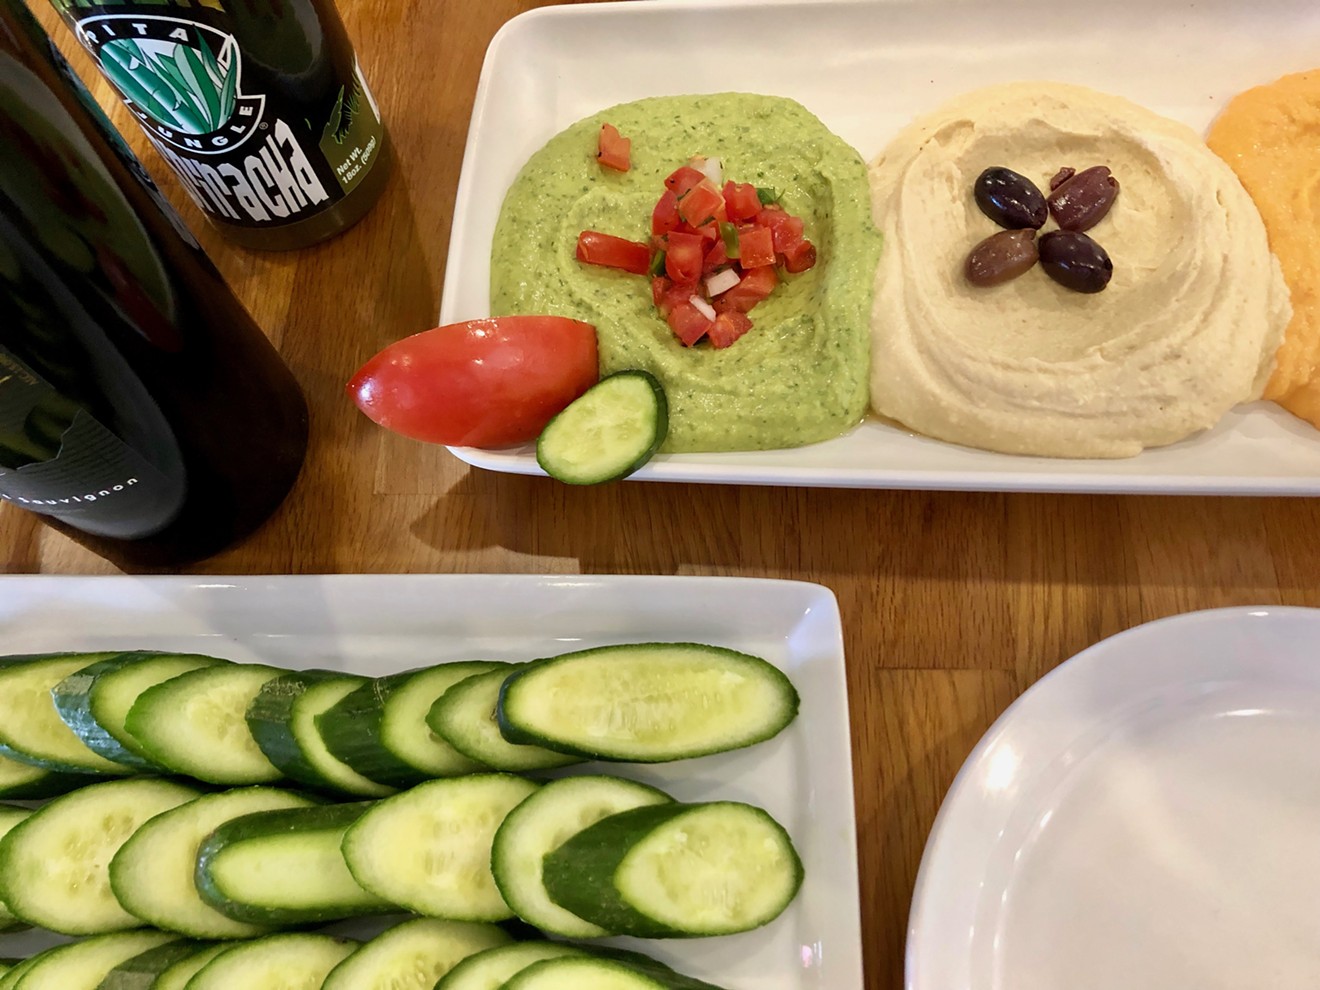 Pita Jungle is known for its hummus.